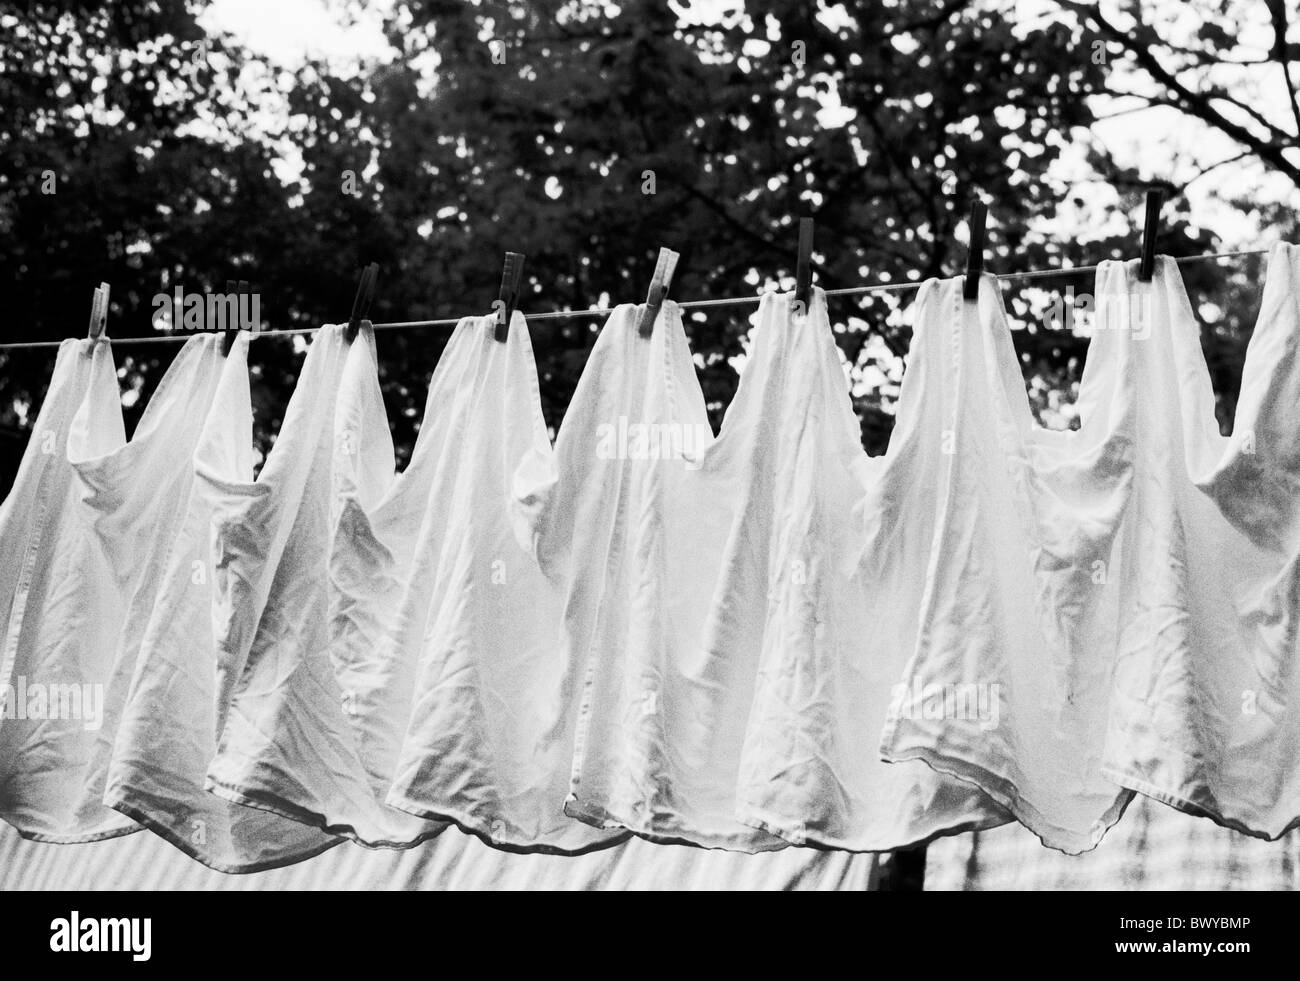 outside hang black and white napkins cloths scarfs laundry clothespins clothesline white Stock Photo